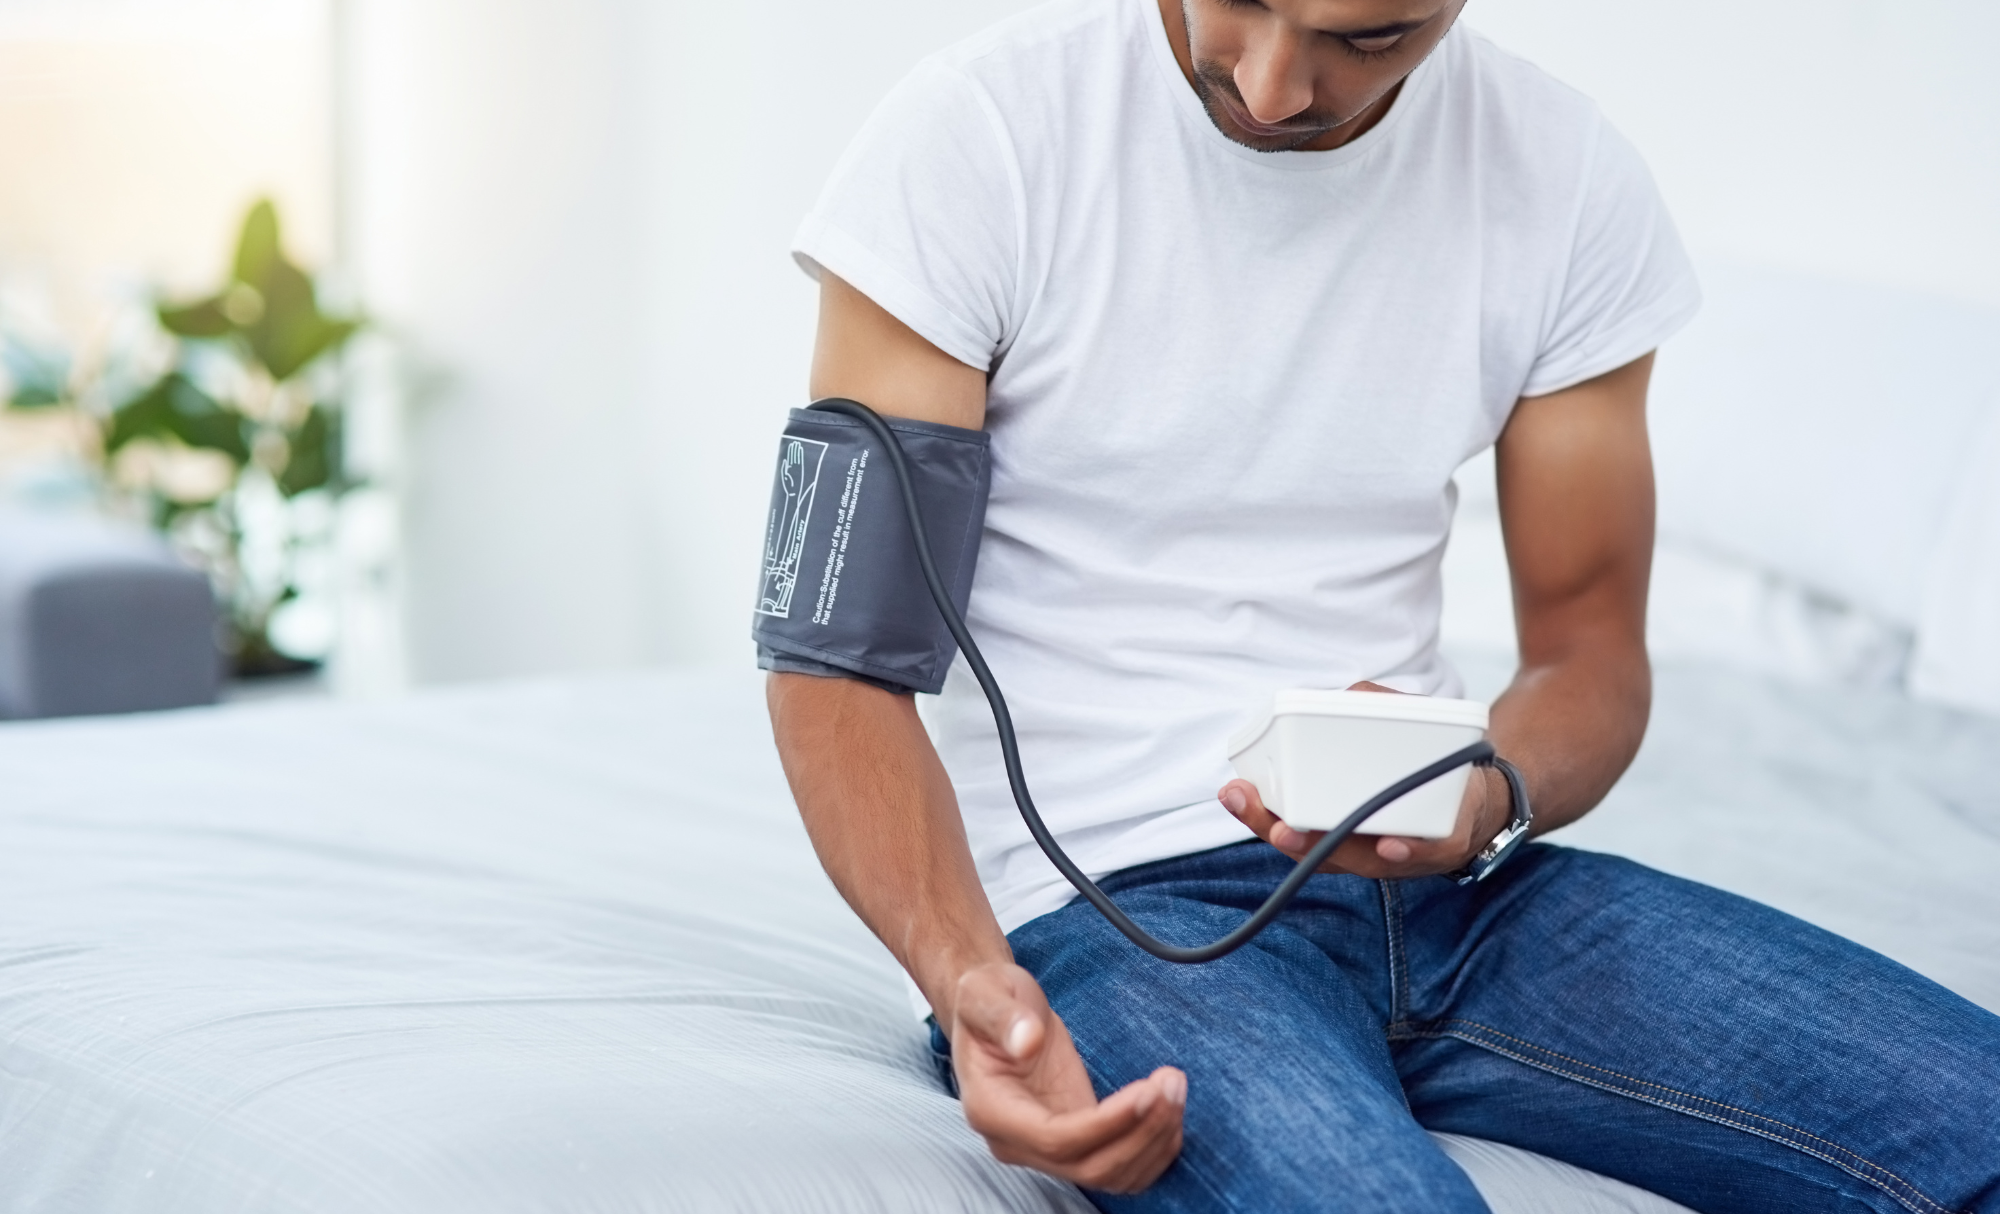 A man sitting down with a blood pressure monitor on his arm.